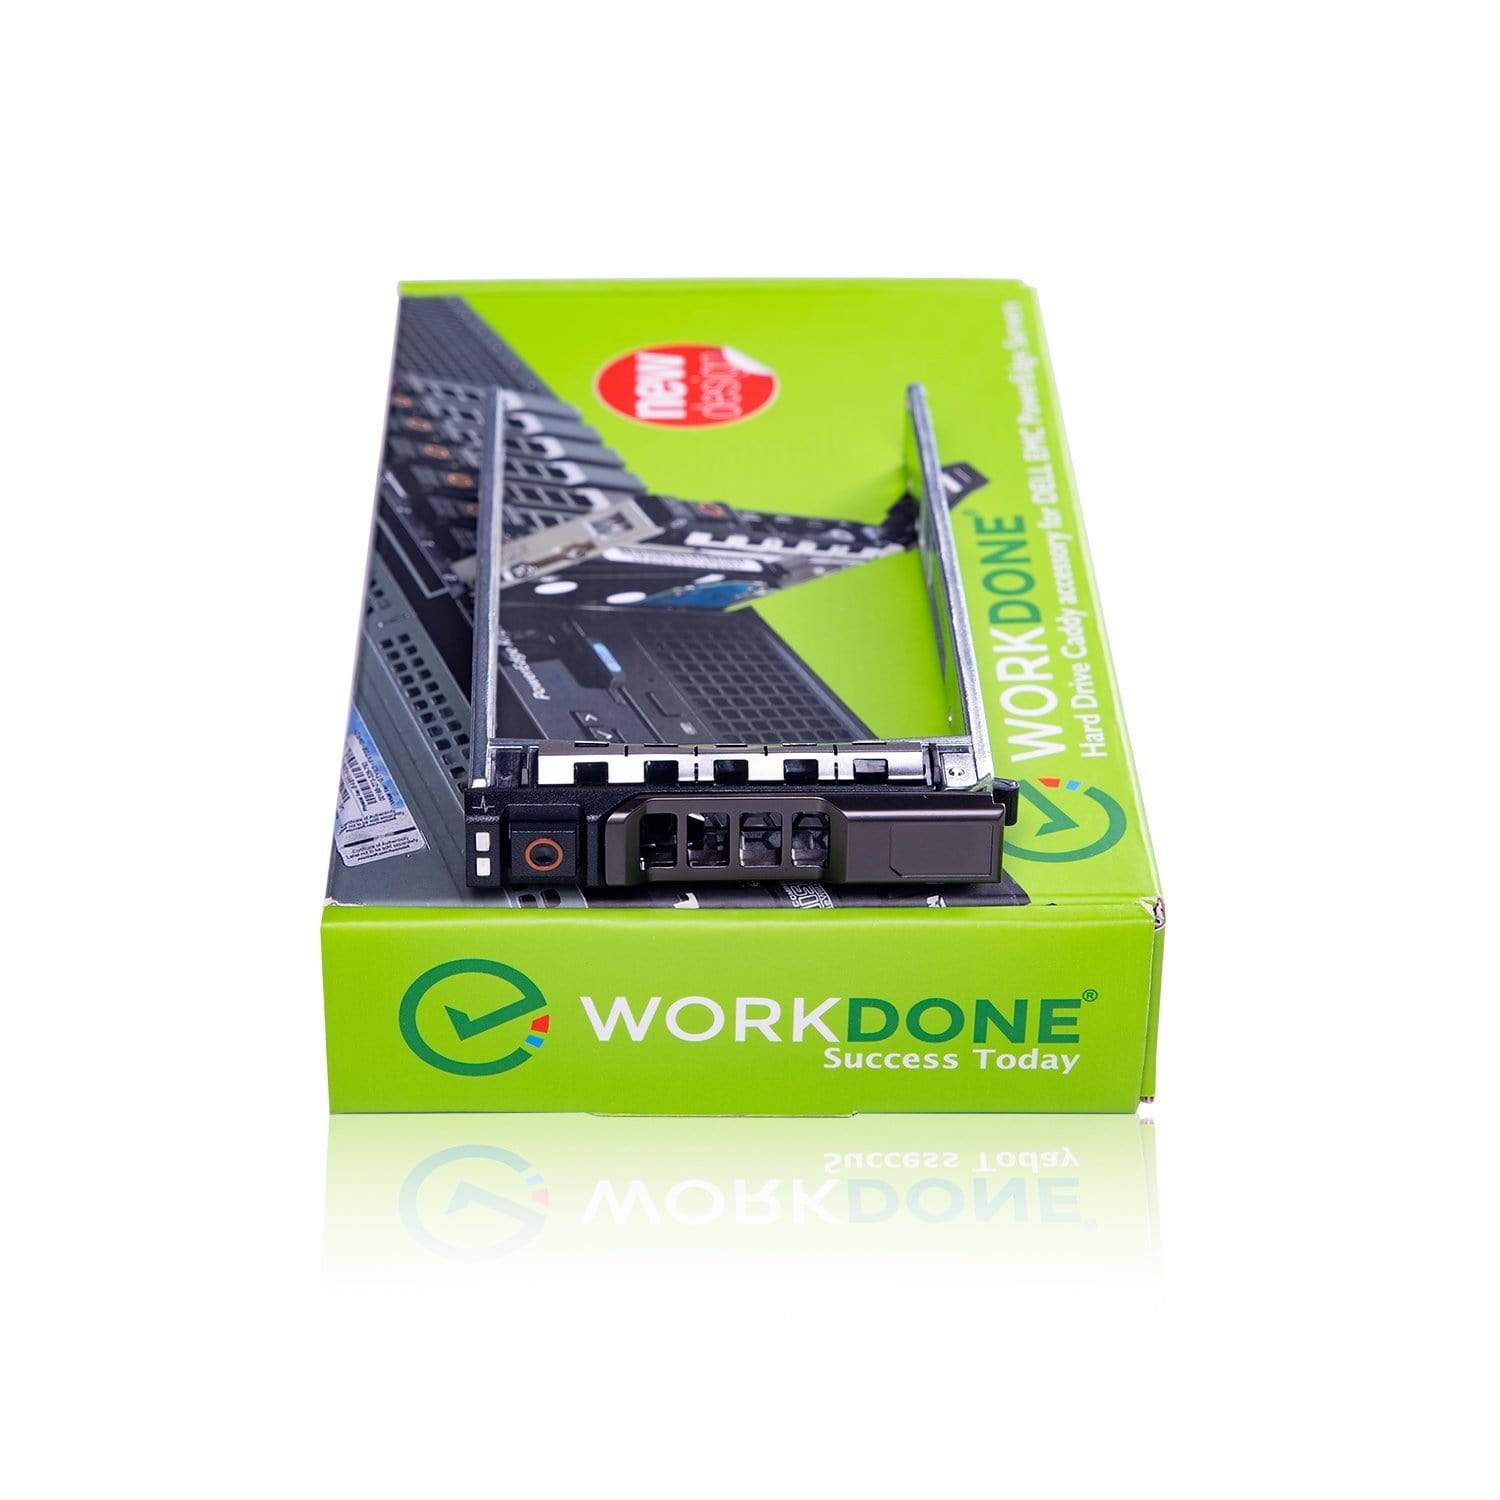 WORKDONE 4-Pack 8FKXC Compatible 2.5 inch Caddy for Dell PowerEdge Servers